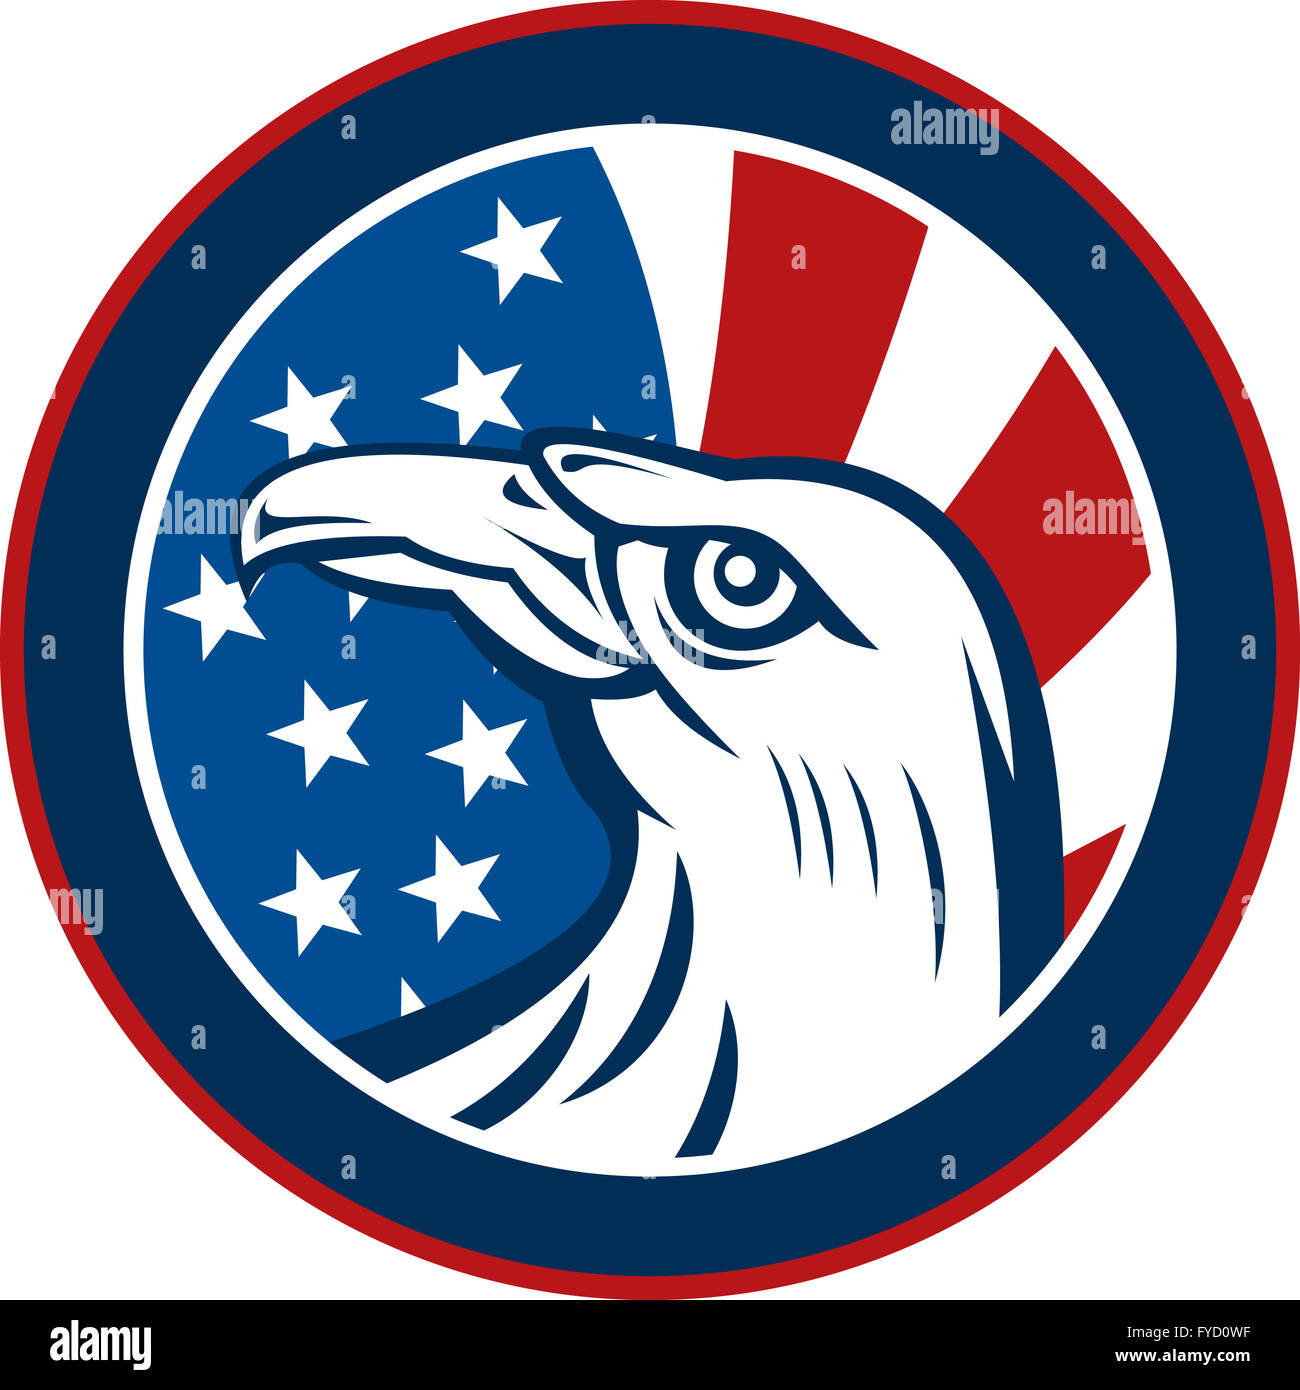 American eagle with stars and stripes flag Stock Photo - Alamy